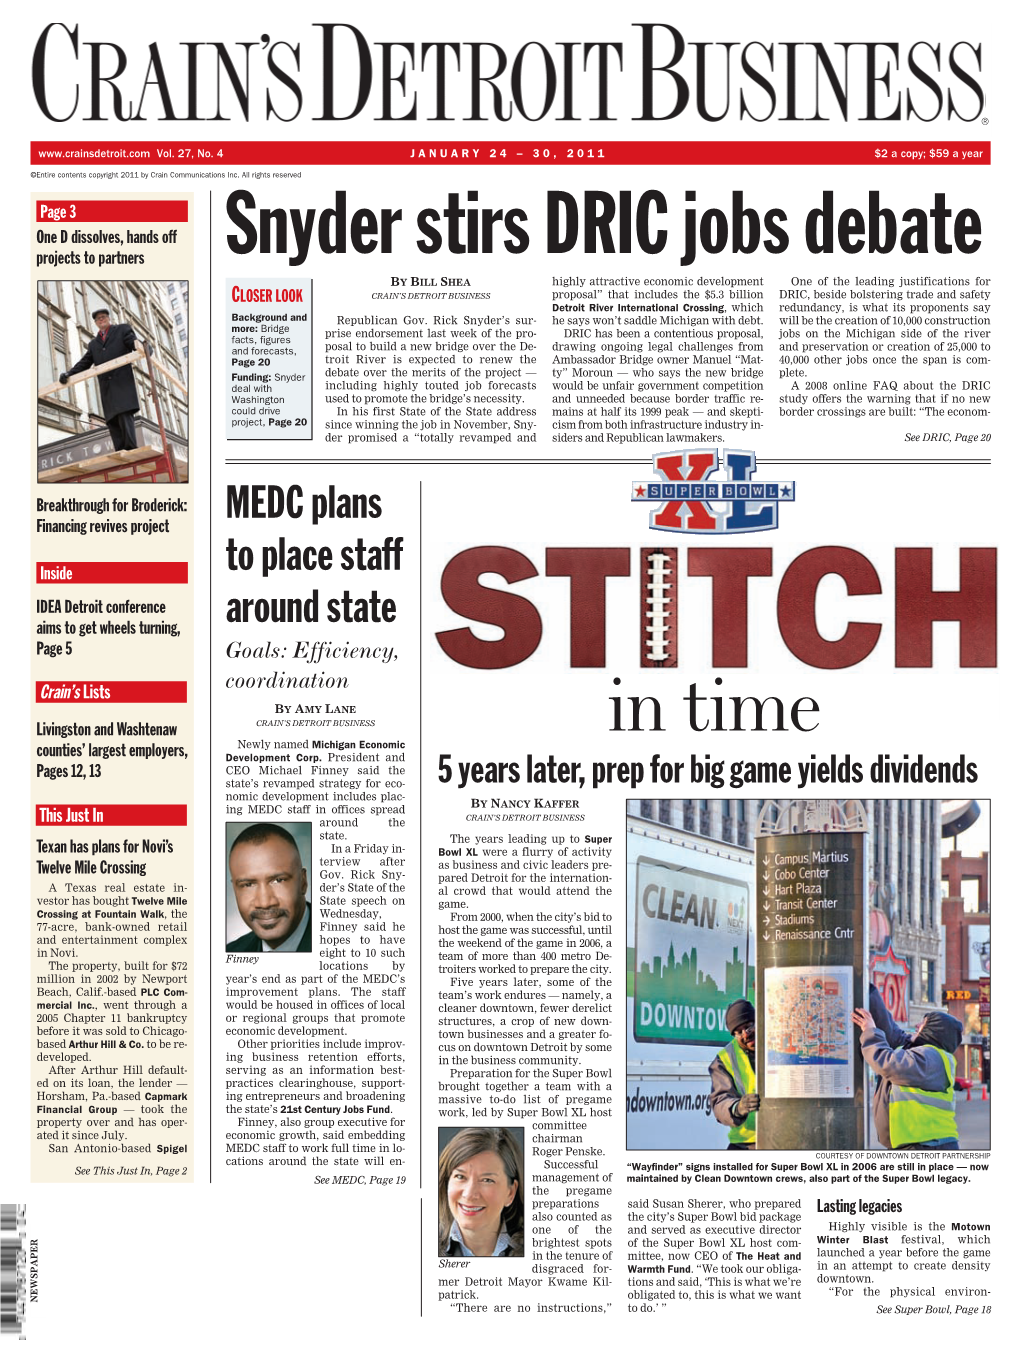 Snyder Stirs DRIC Jobs Debate Projects to Partners